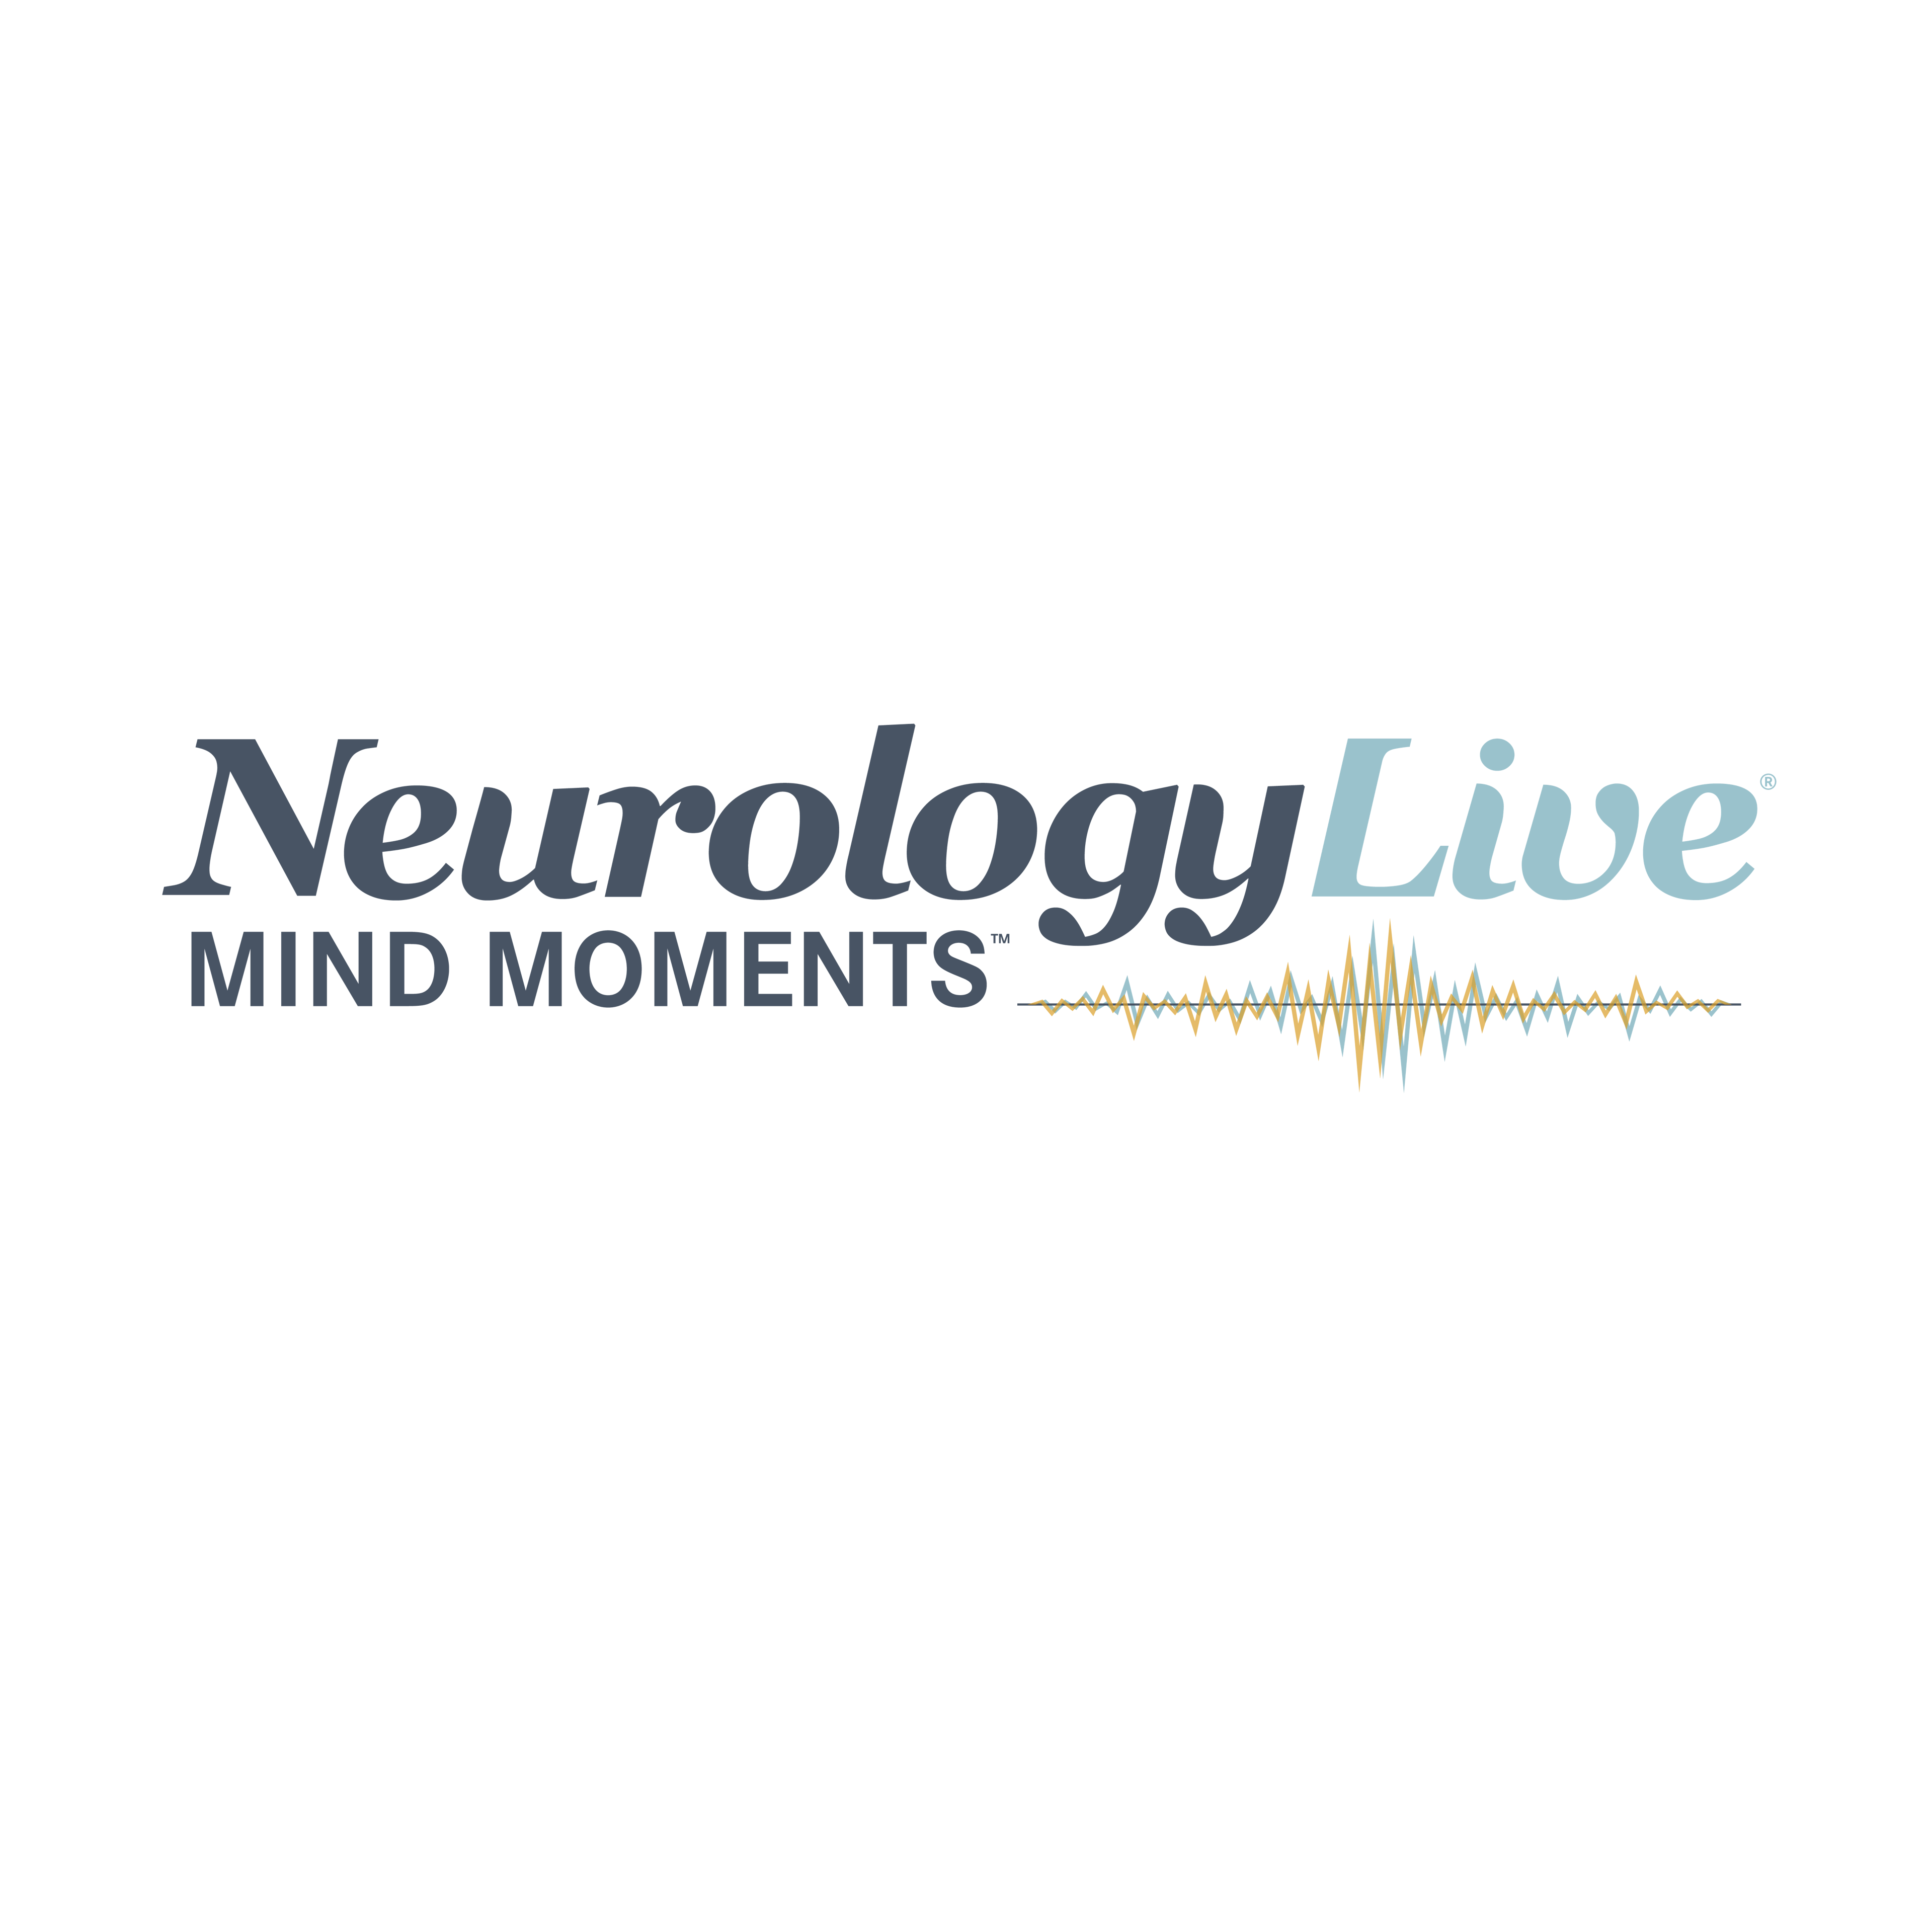 Episode 106: Potential Role of Stathmin-2 in Amyotrophic Lateral Sclerosis